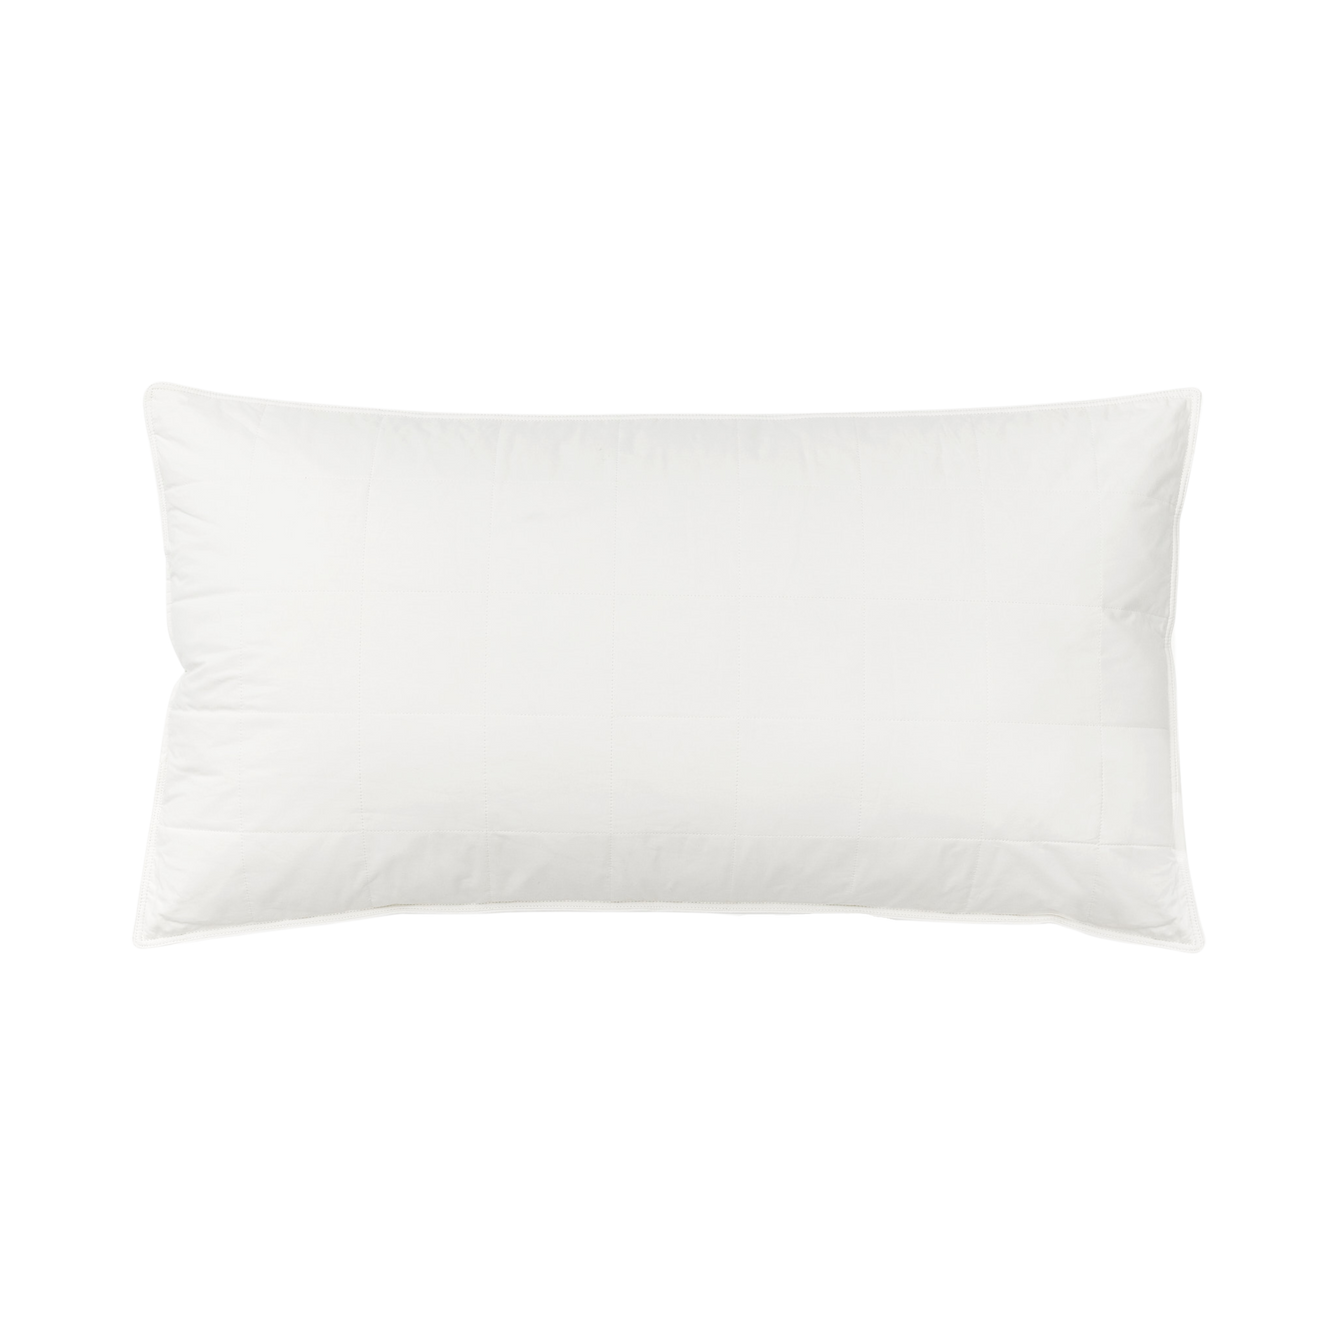 Silk Lined Pillow Special Offer: Get a Free Silk Eye Mask with Each Pillow Purchased!